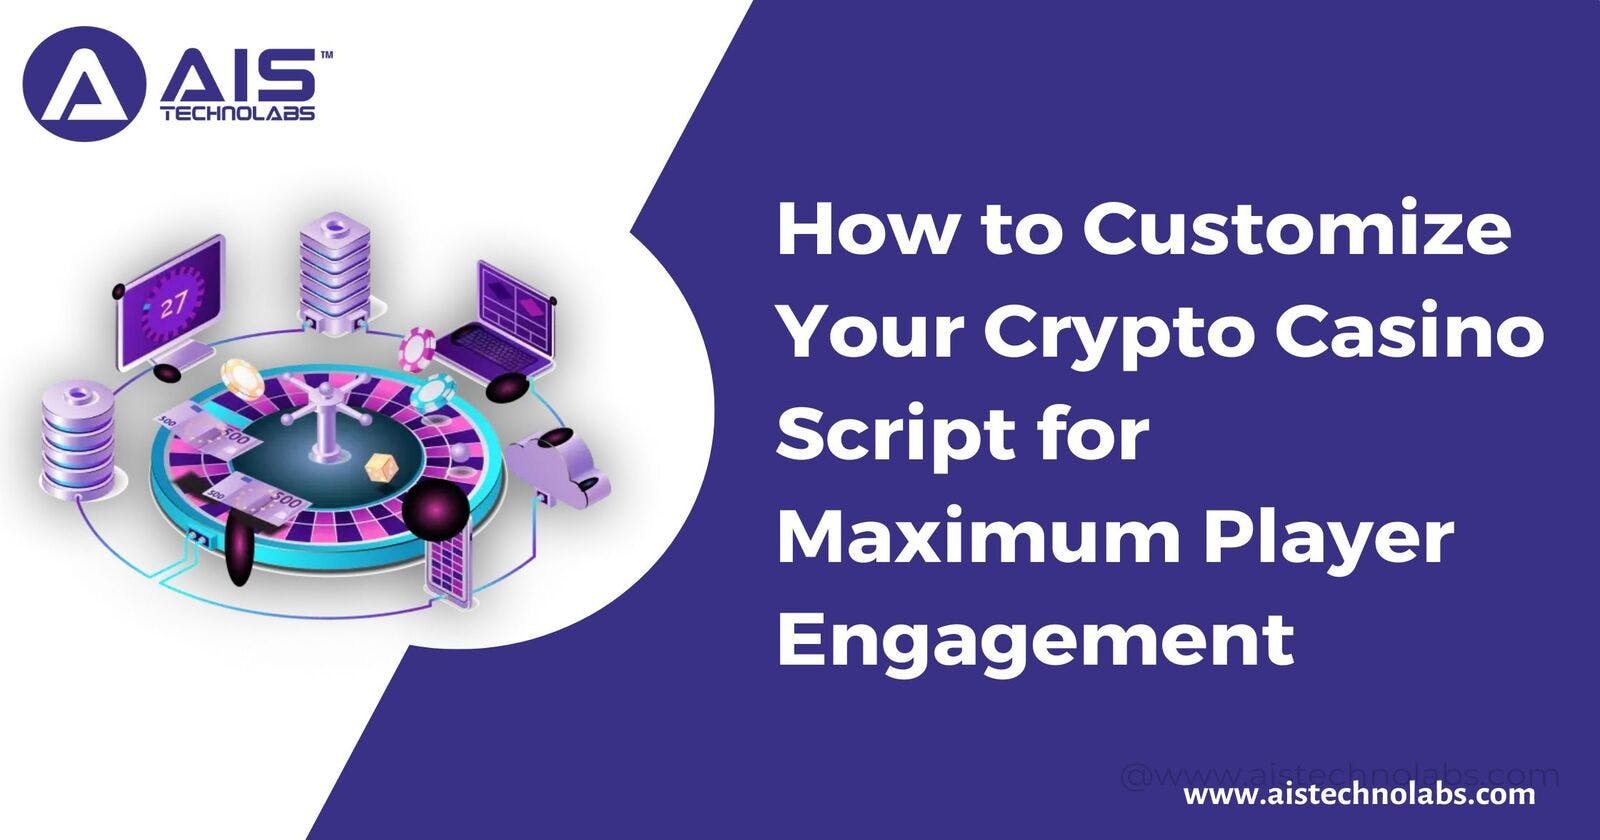 How to Customize Your Crypto Casino Script for Maximum Player Engagement